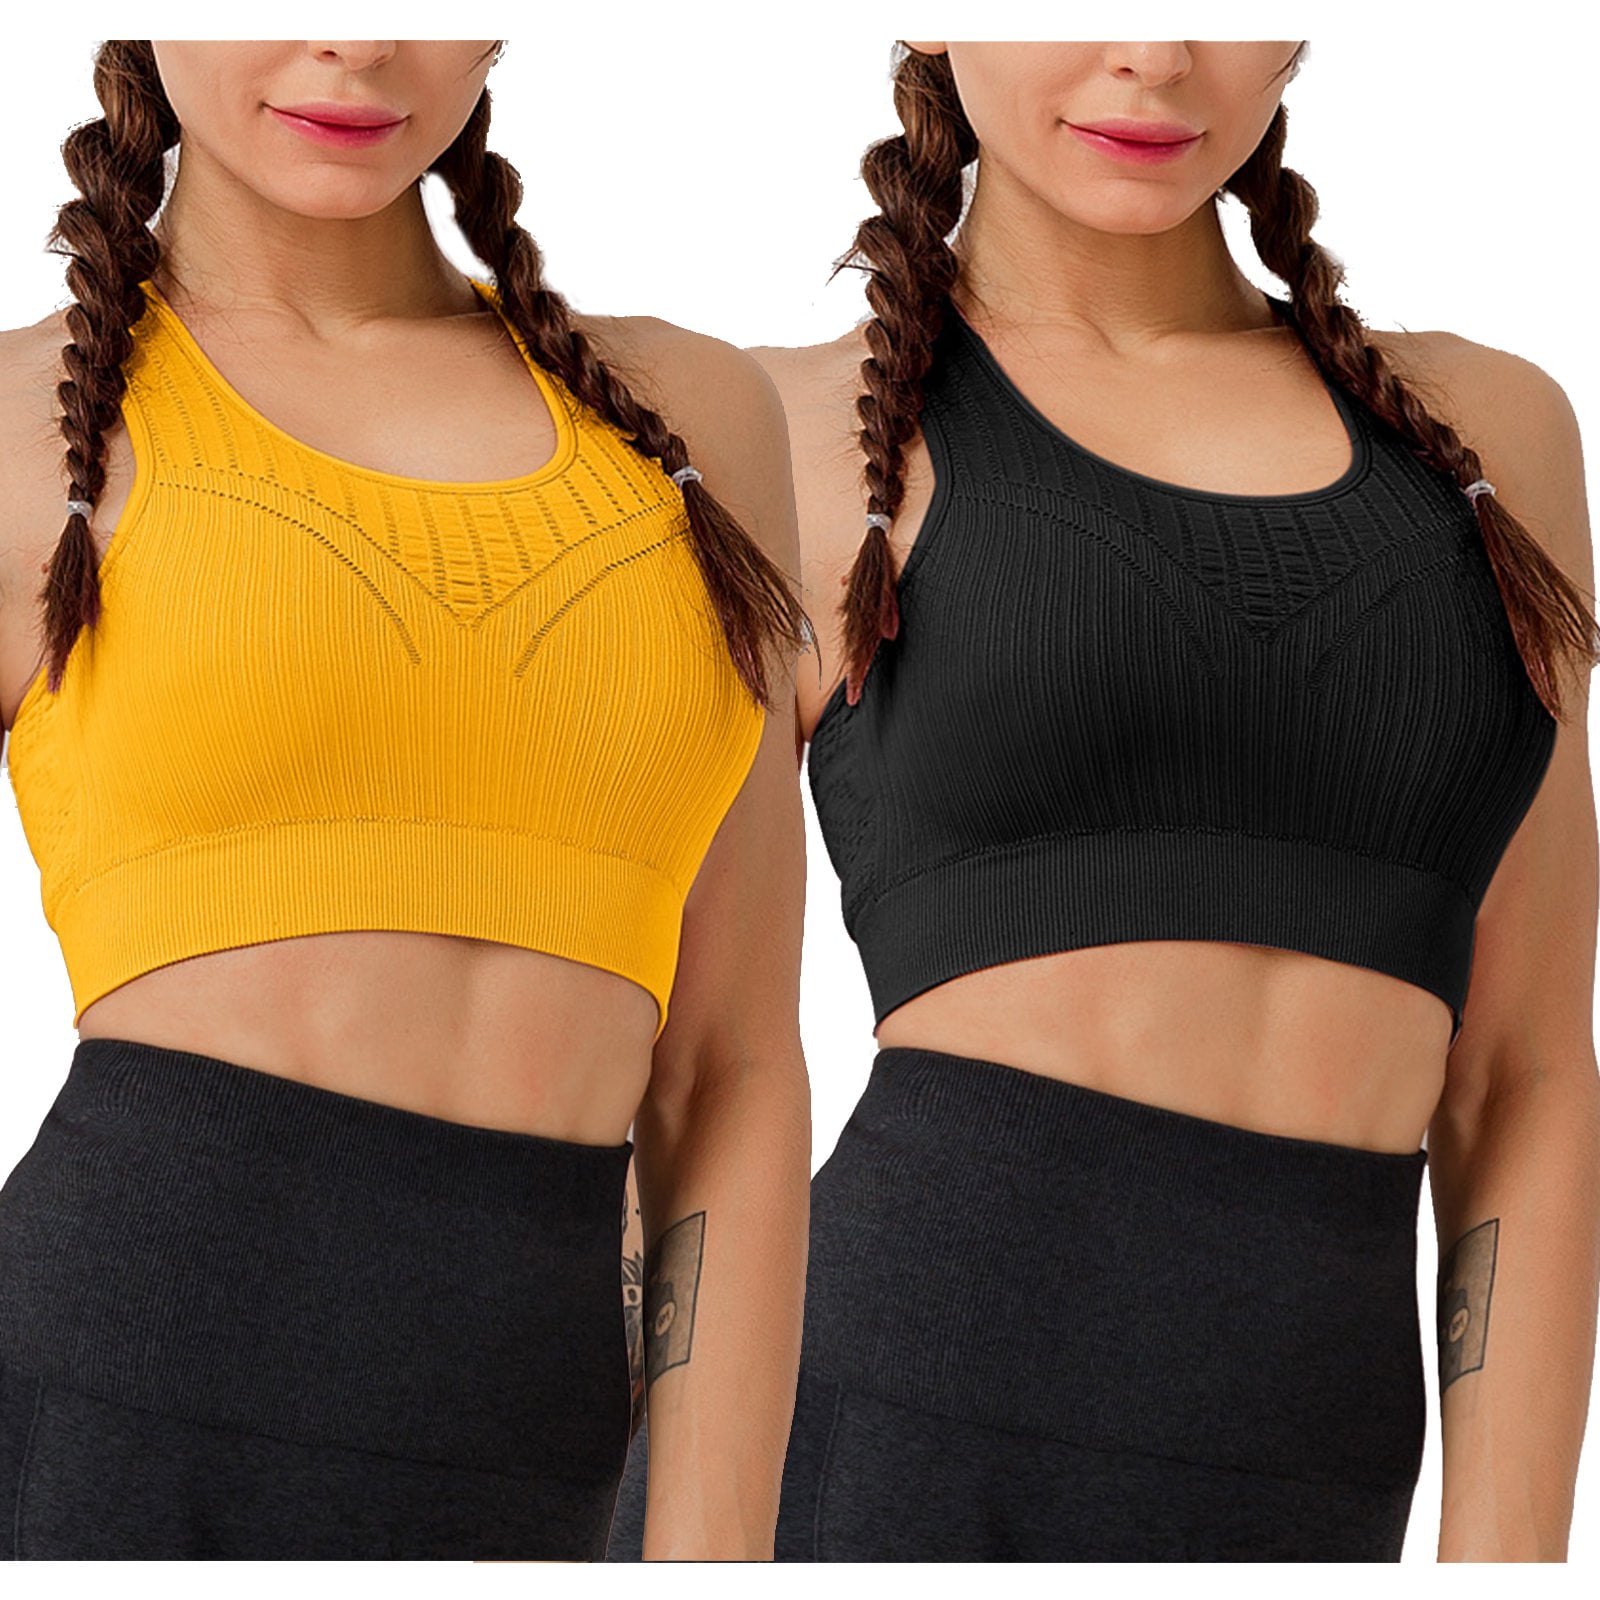  HK97 Yellow Bees Insect Honey Honeycomb Geometry Sports Bras  for Women High Support Racerback Crop Tops for Teen Girls, Casual Fitness  Workout Tank Tops, Yoga Running Vest Top Removable Padded Bra